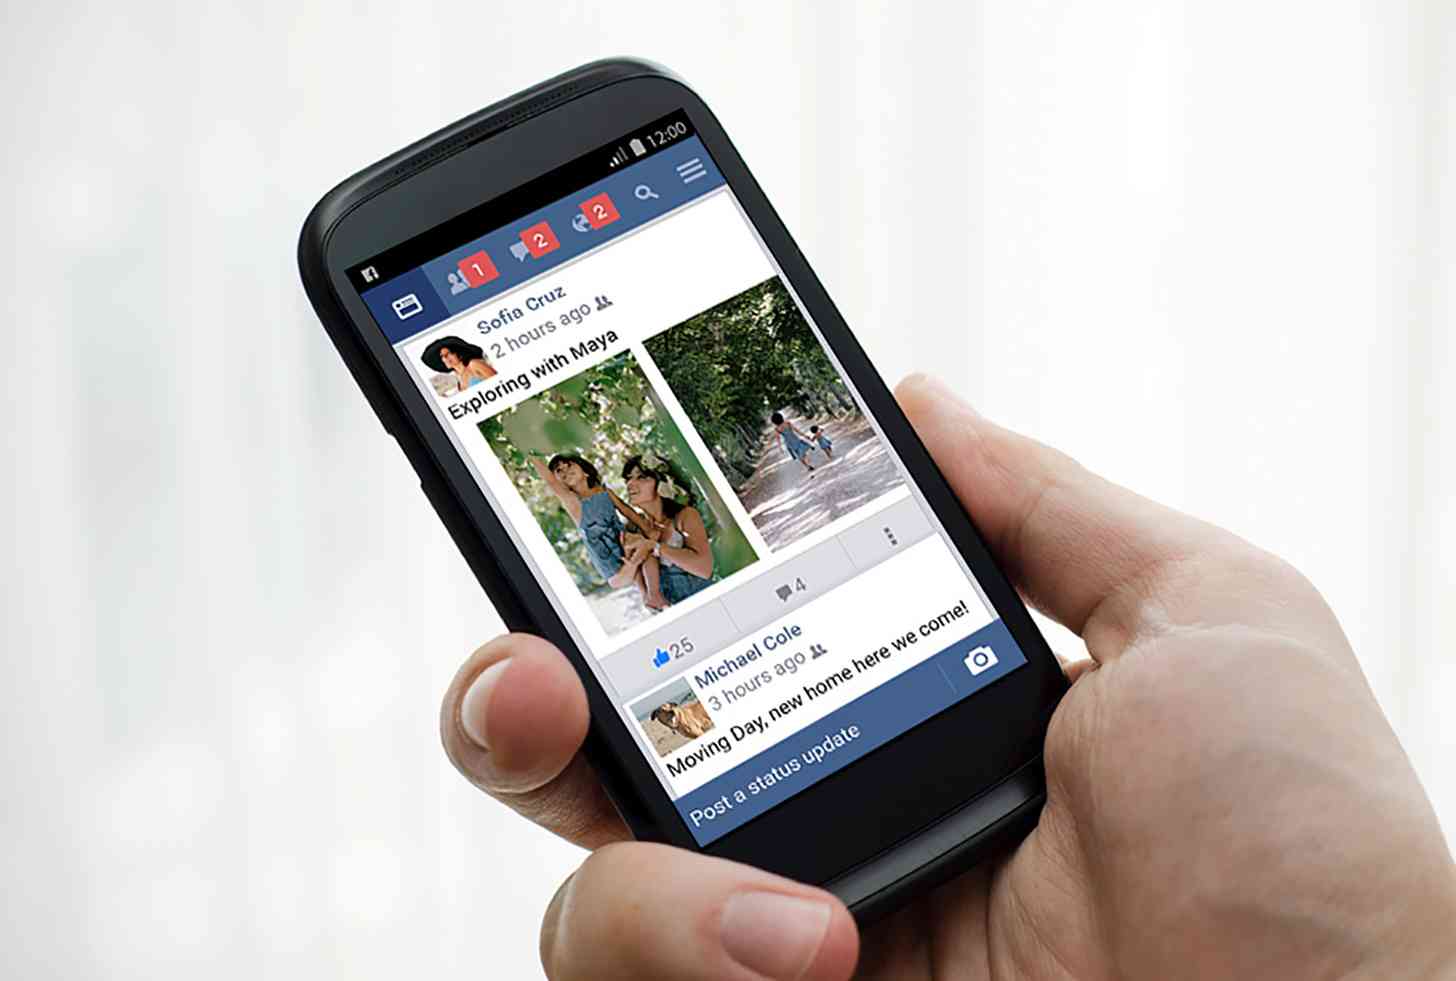 Facebook Lite Android app official